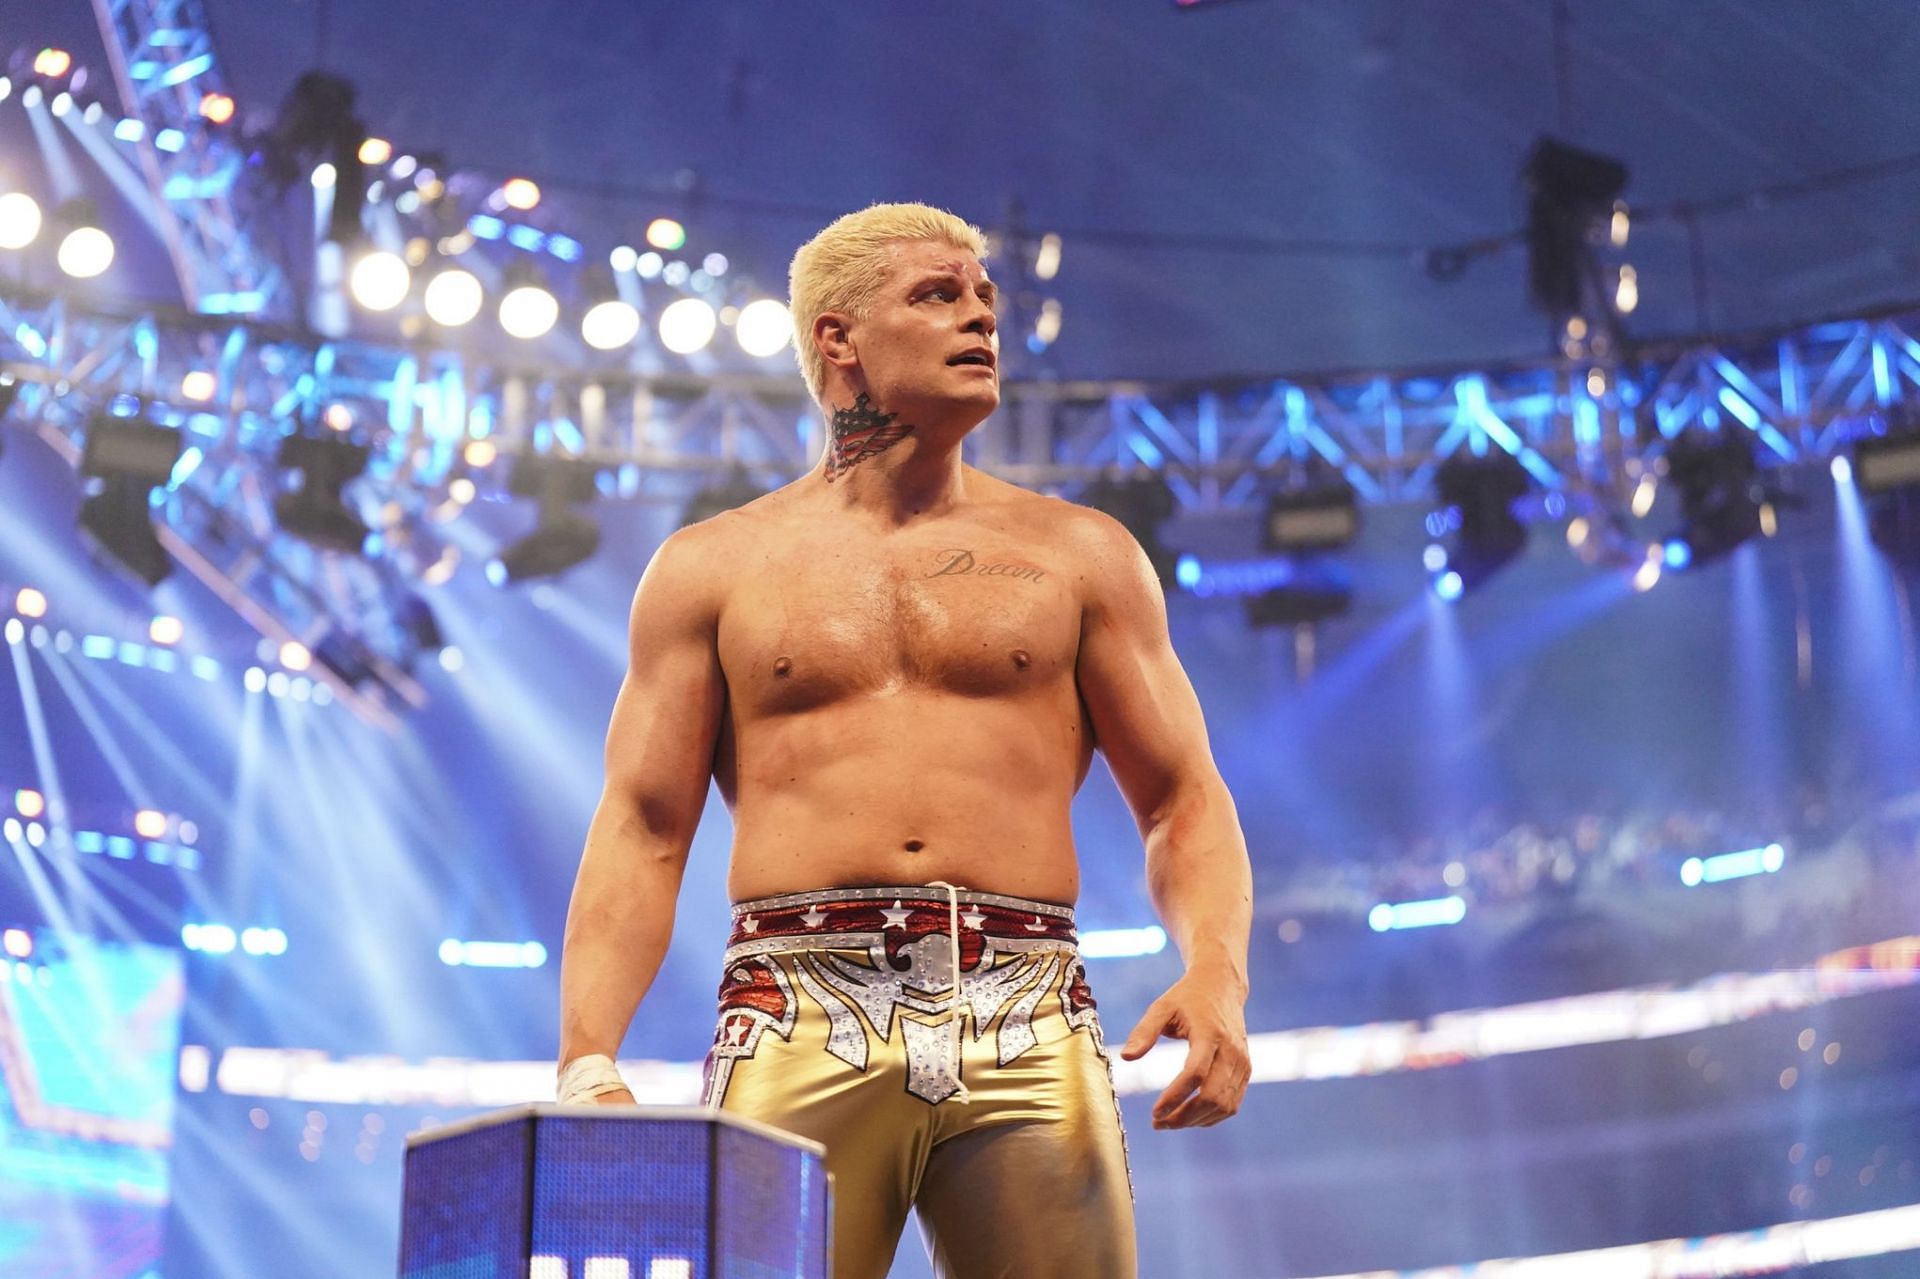 Cody Rhodes is currently feuding with Seth Rollins in WWE